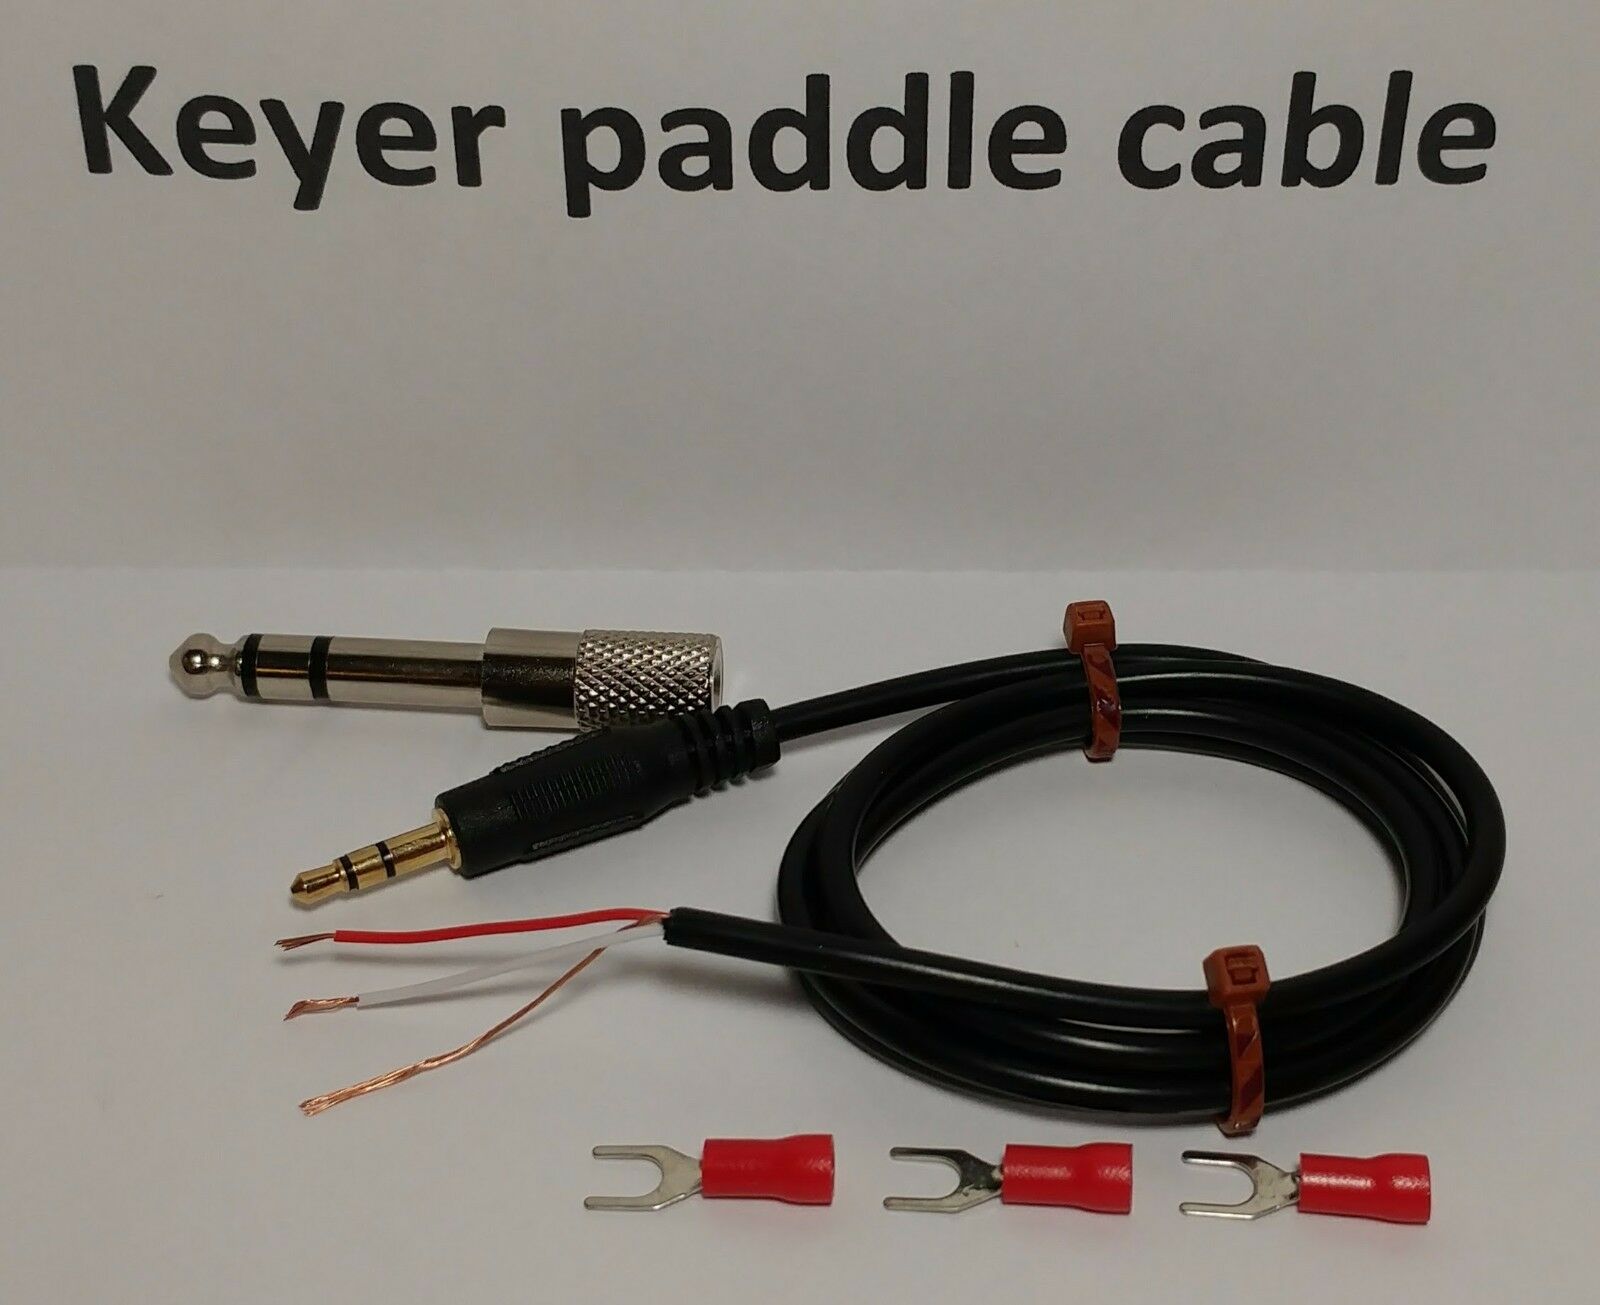 Cw Keyer Paddle Cable 3 Feet 1/4" (6.35mm) 1/8" (3.5mm), Straight Key Morse Code